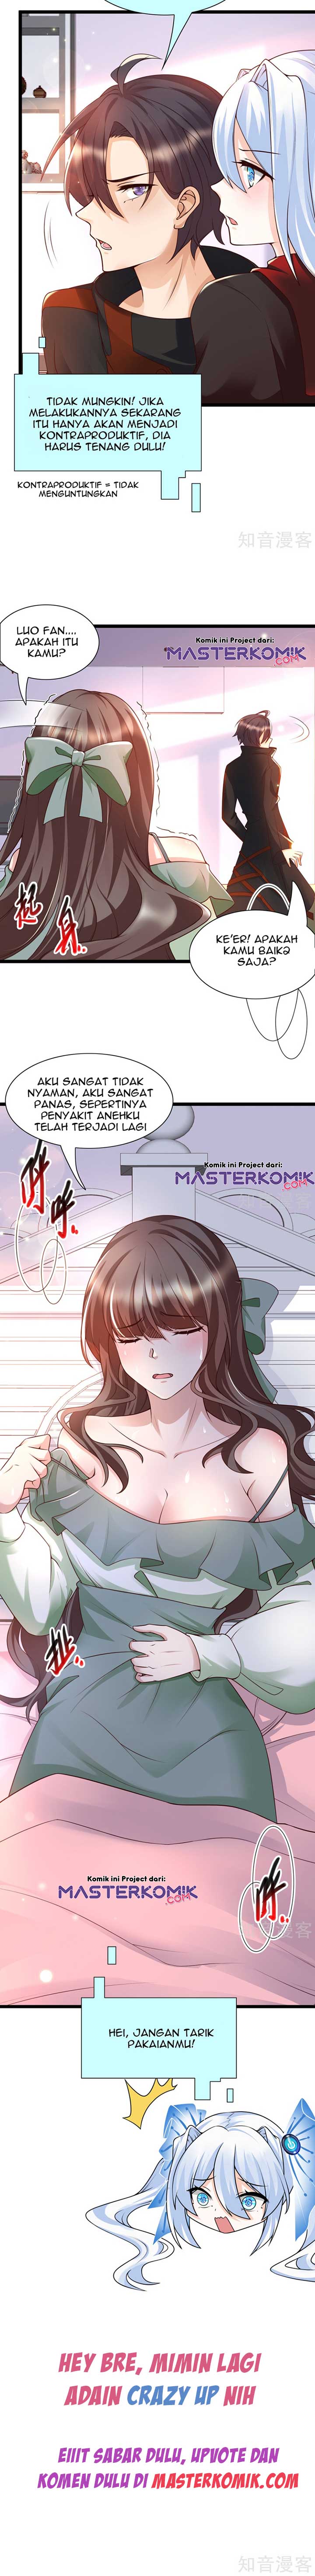 The Goddes Took Me To Be a Master Chapter 19 6